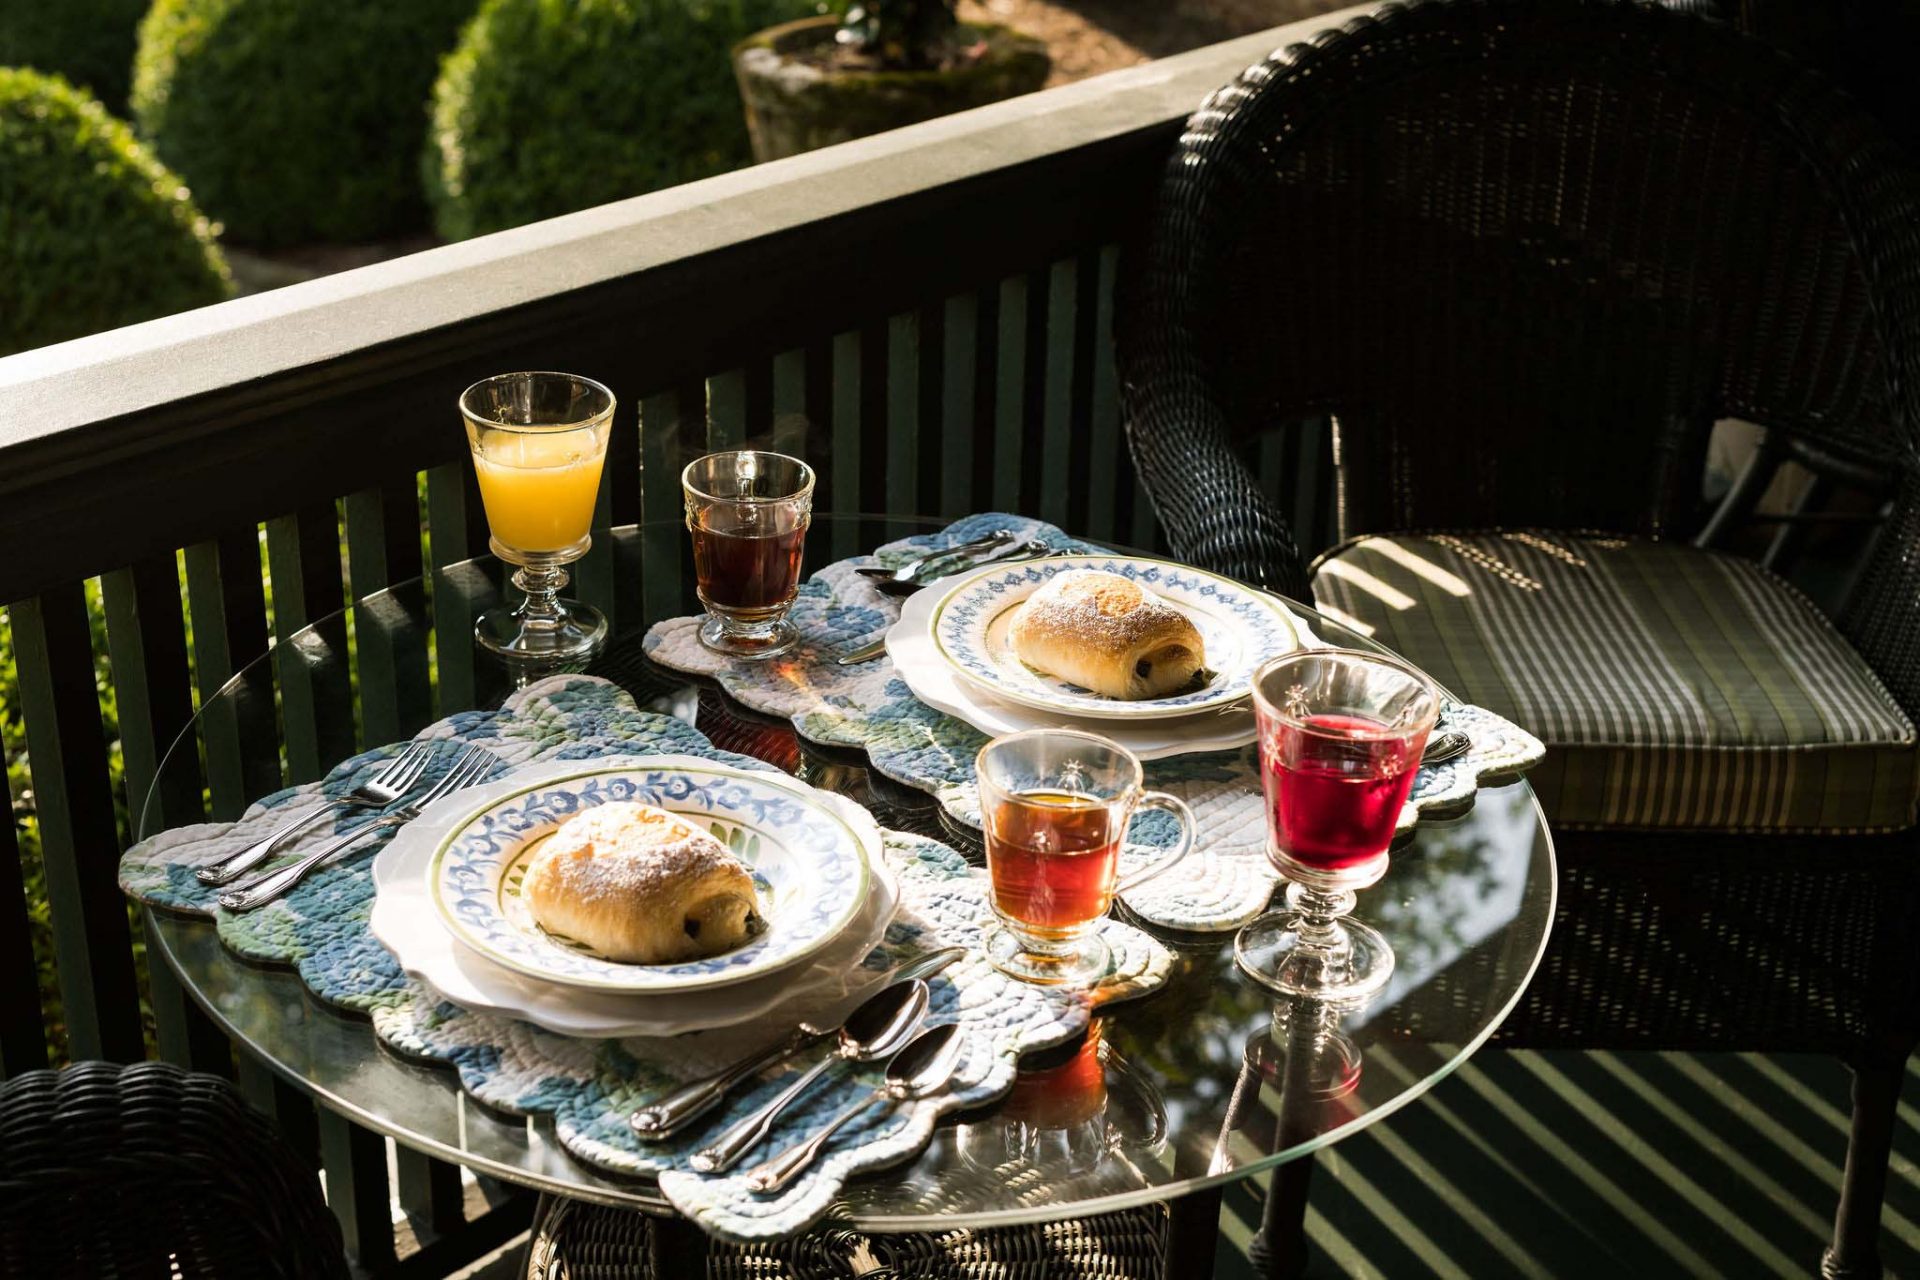 Breakfast served on the porch. A table for two with floral placemats with ceramic dishes and cuttlery, two glasses of juice, two glasses of tea and two home-baked buns.